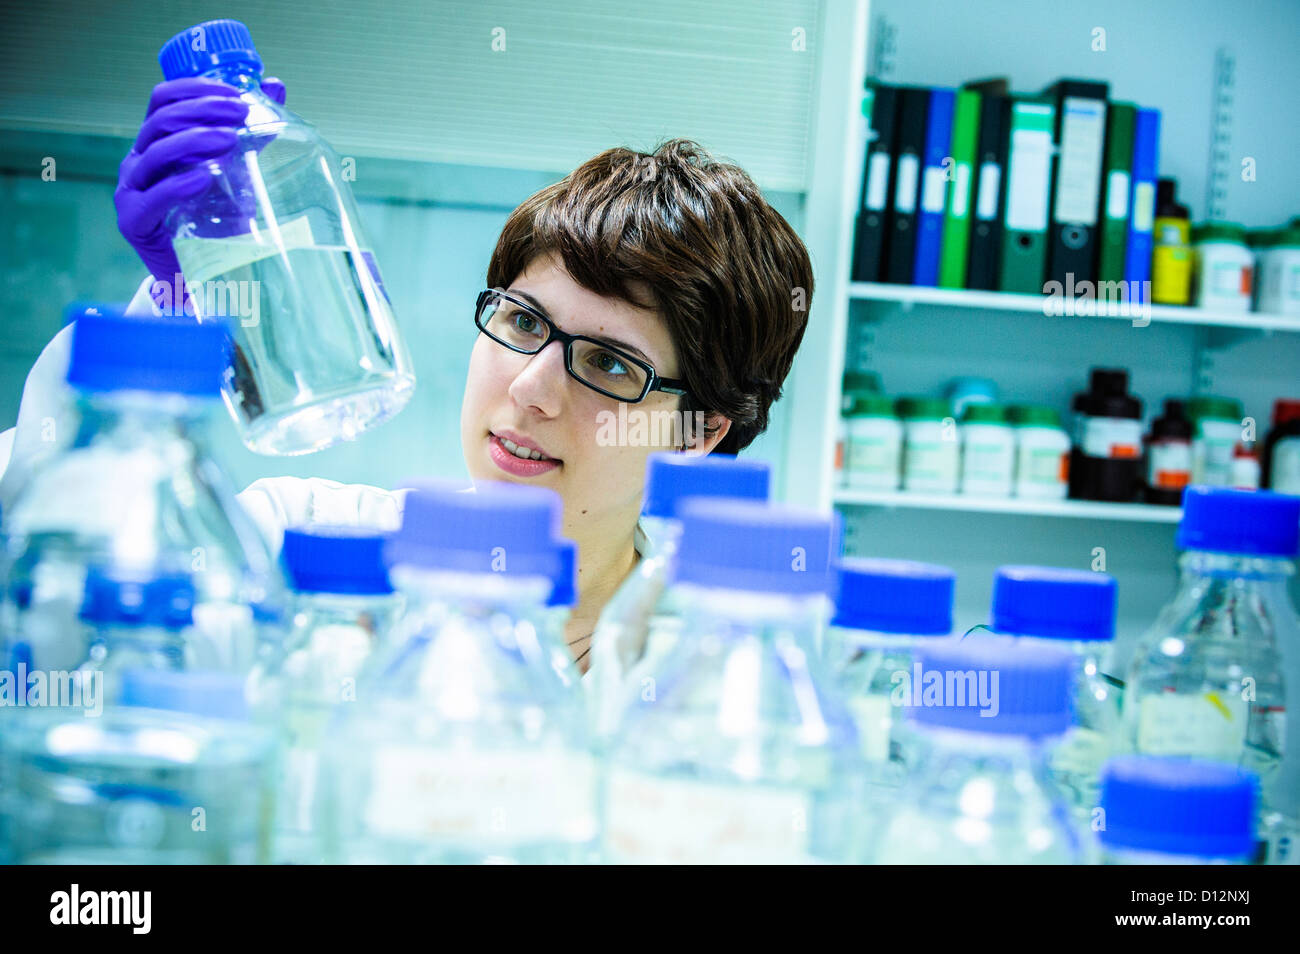 Young female scientist  in science lab holding a glass samples jar Stock Photo